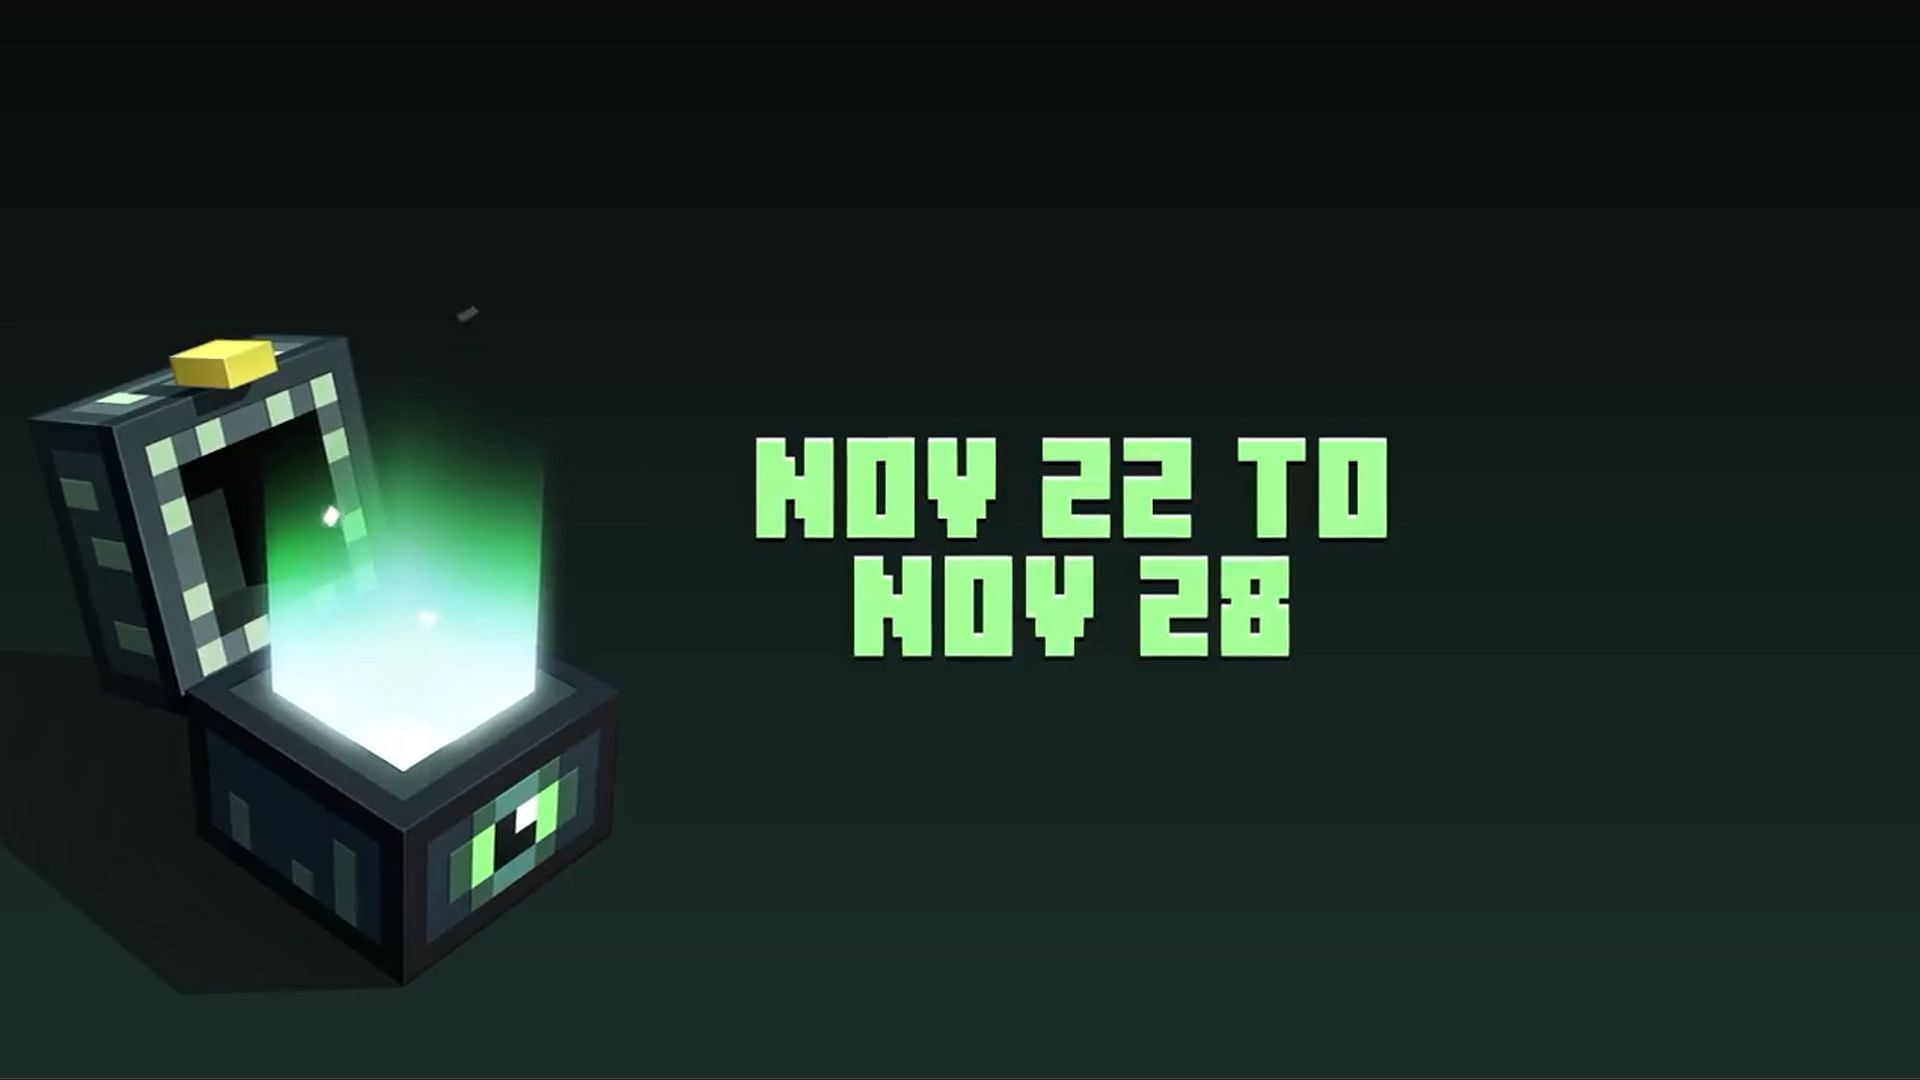 The Block Friday Sale will be active from November 22 to 28* on Bedrock Edition (Image via Mojang)